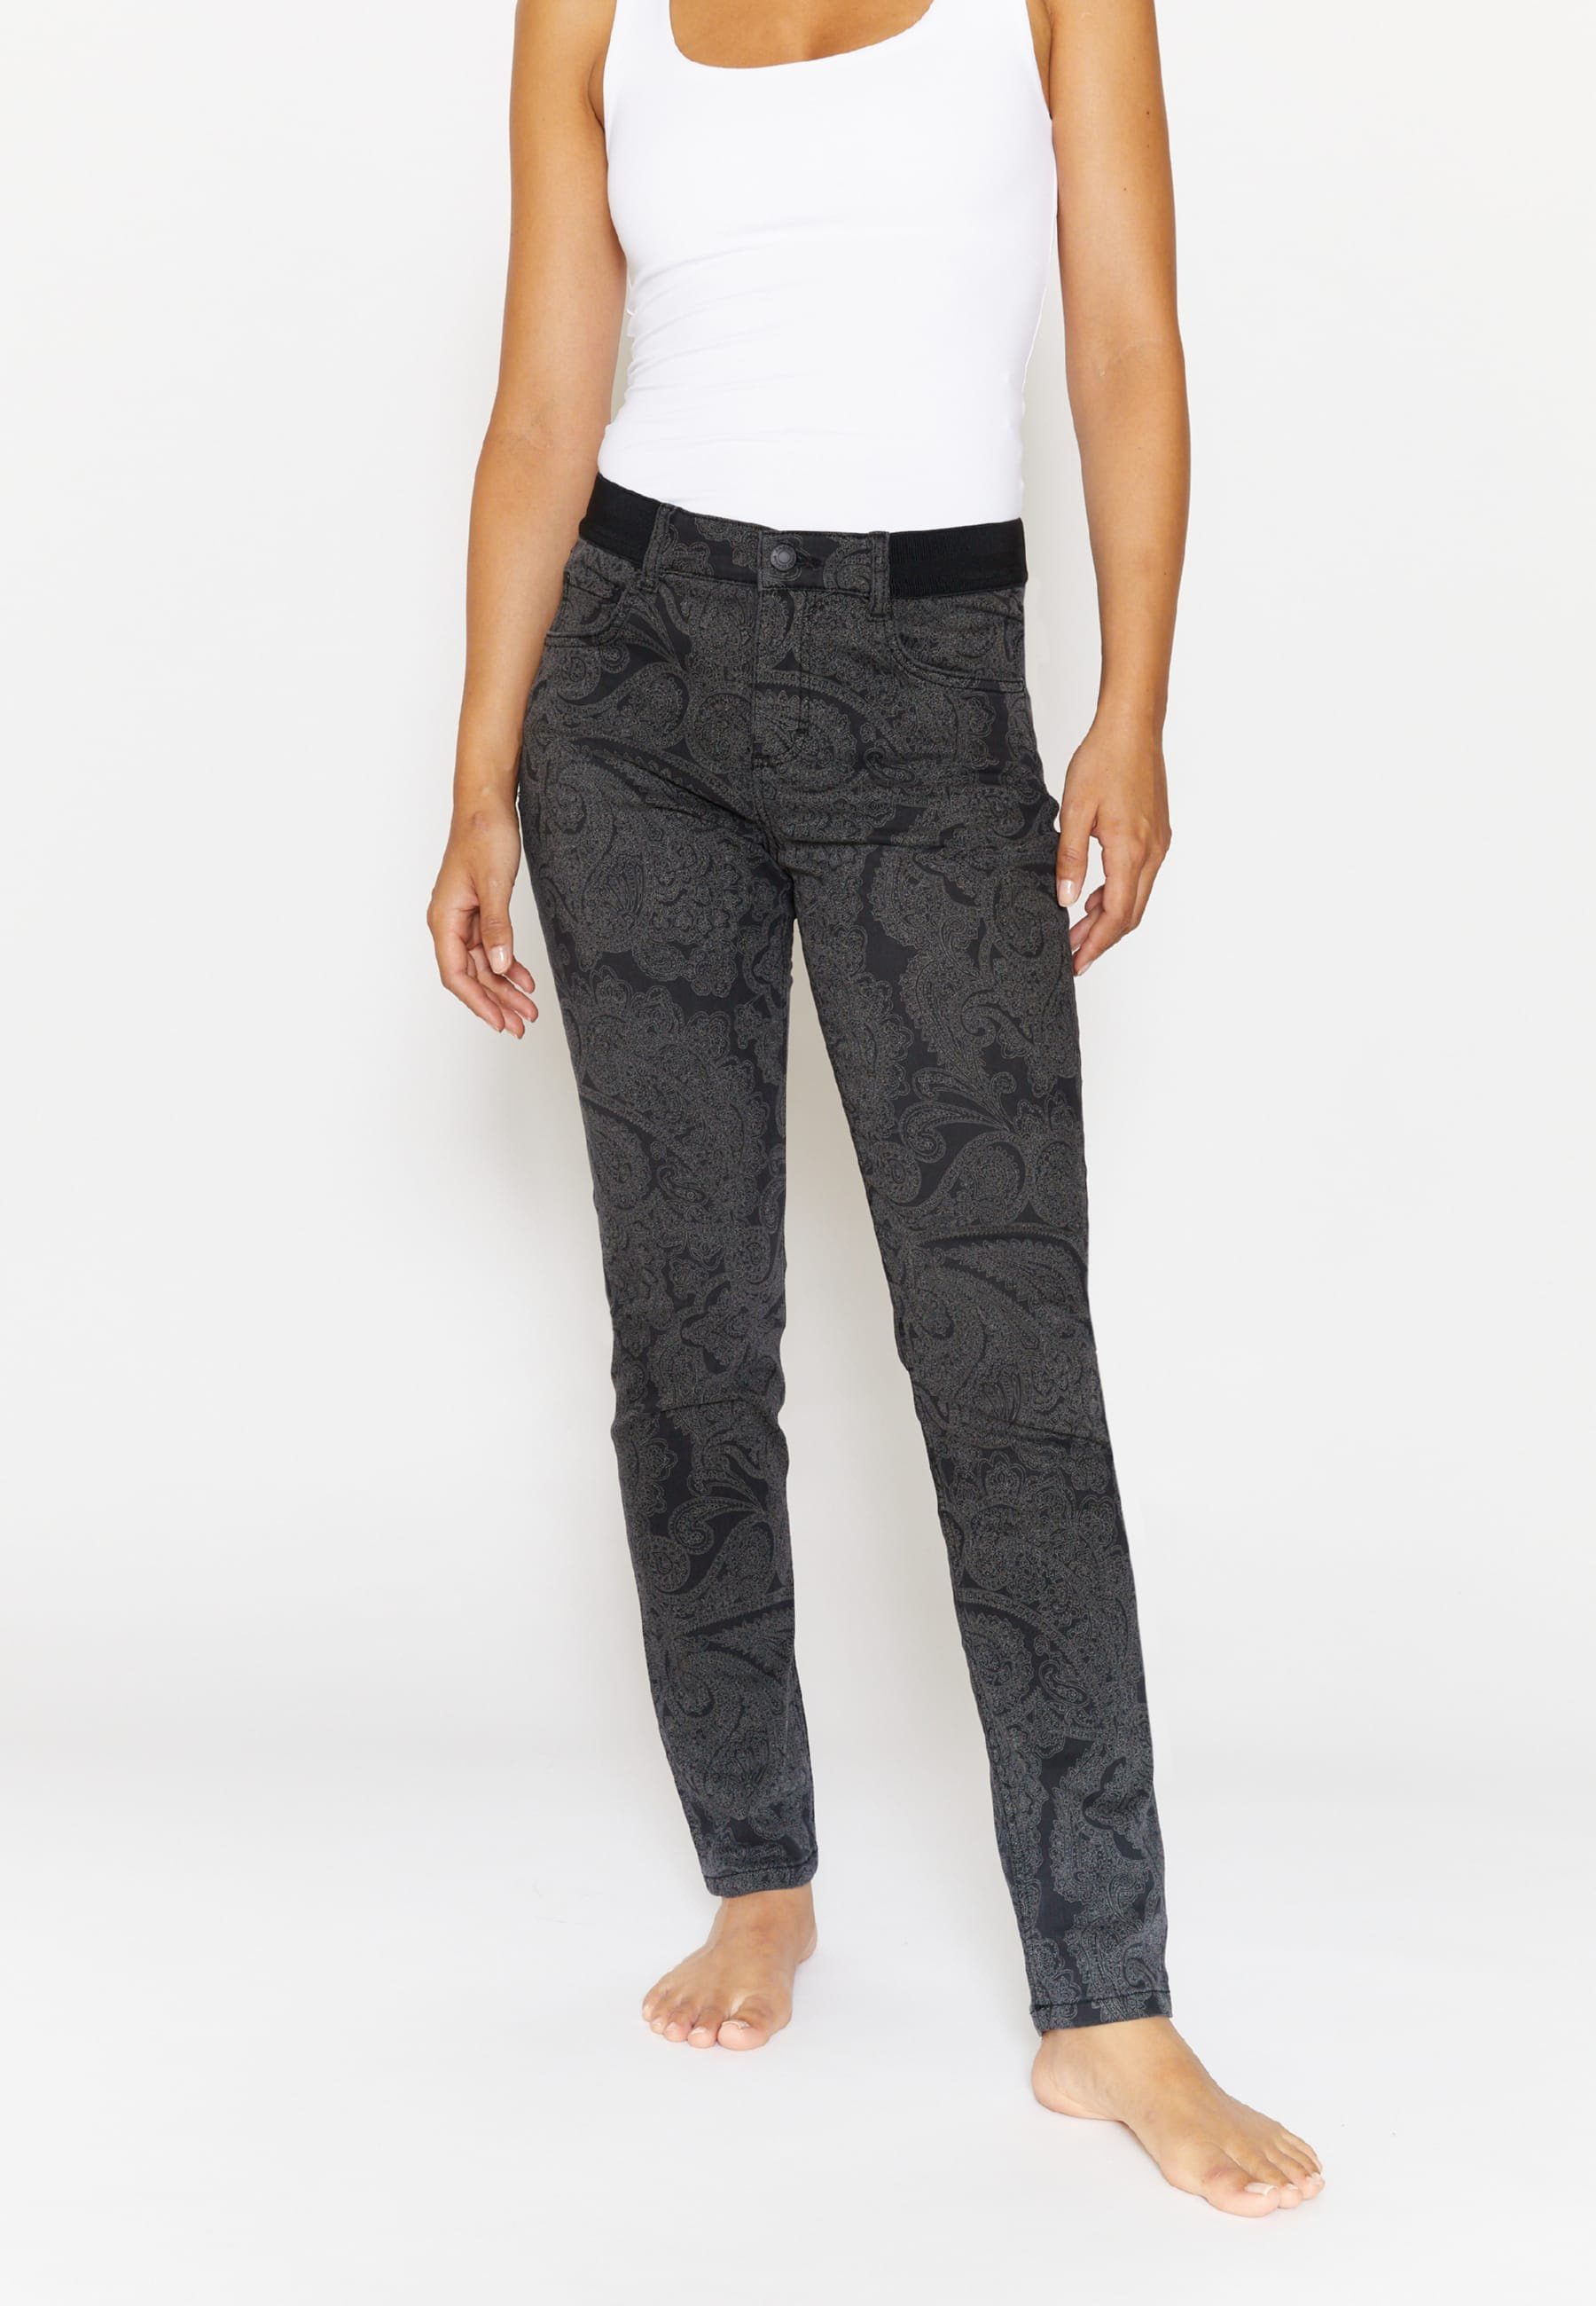 Jeans anthrazit ANGELS mit Size Label-Applikationen One mit Paisley-Muster Slim-fit-Jeans